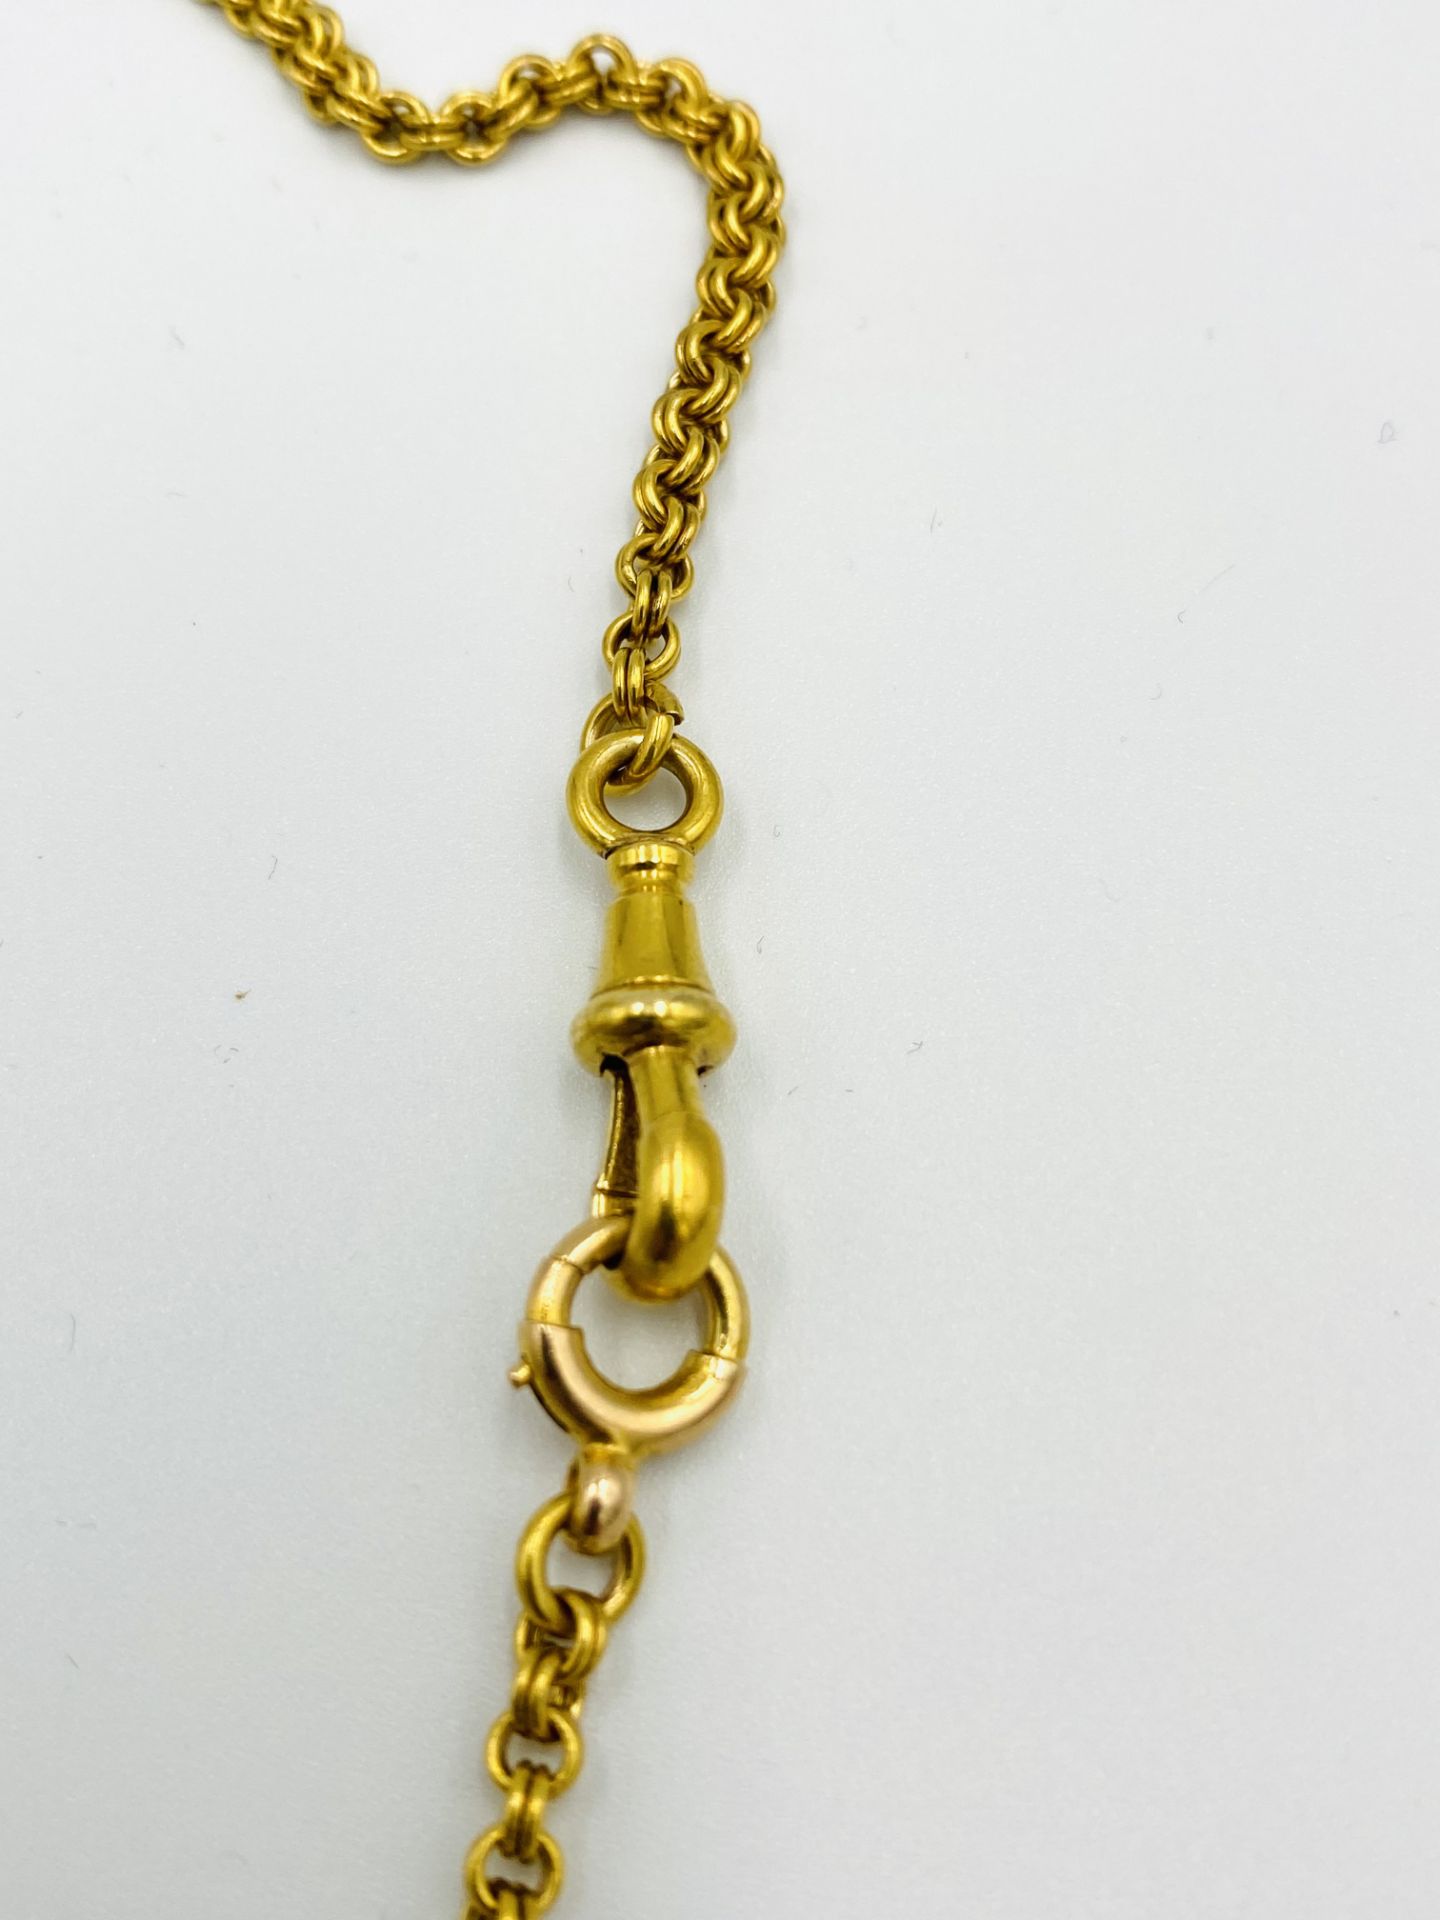 9ct gold necklace with 18ct gold tassel - Image 4 of 5